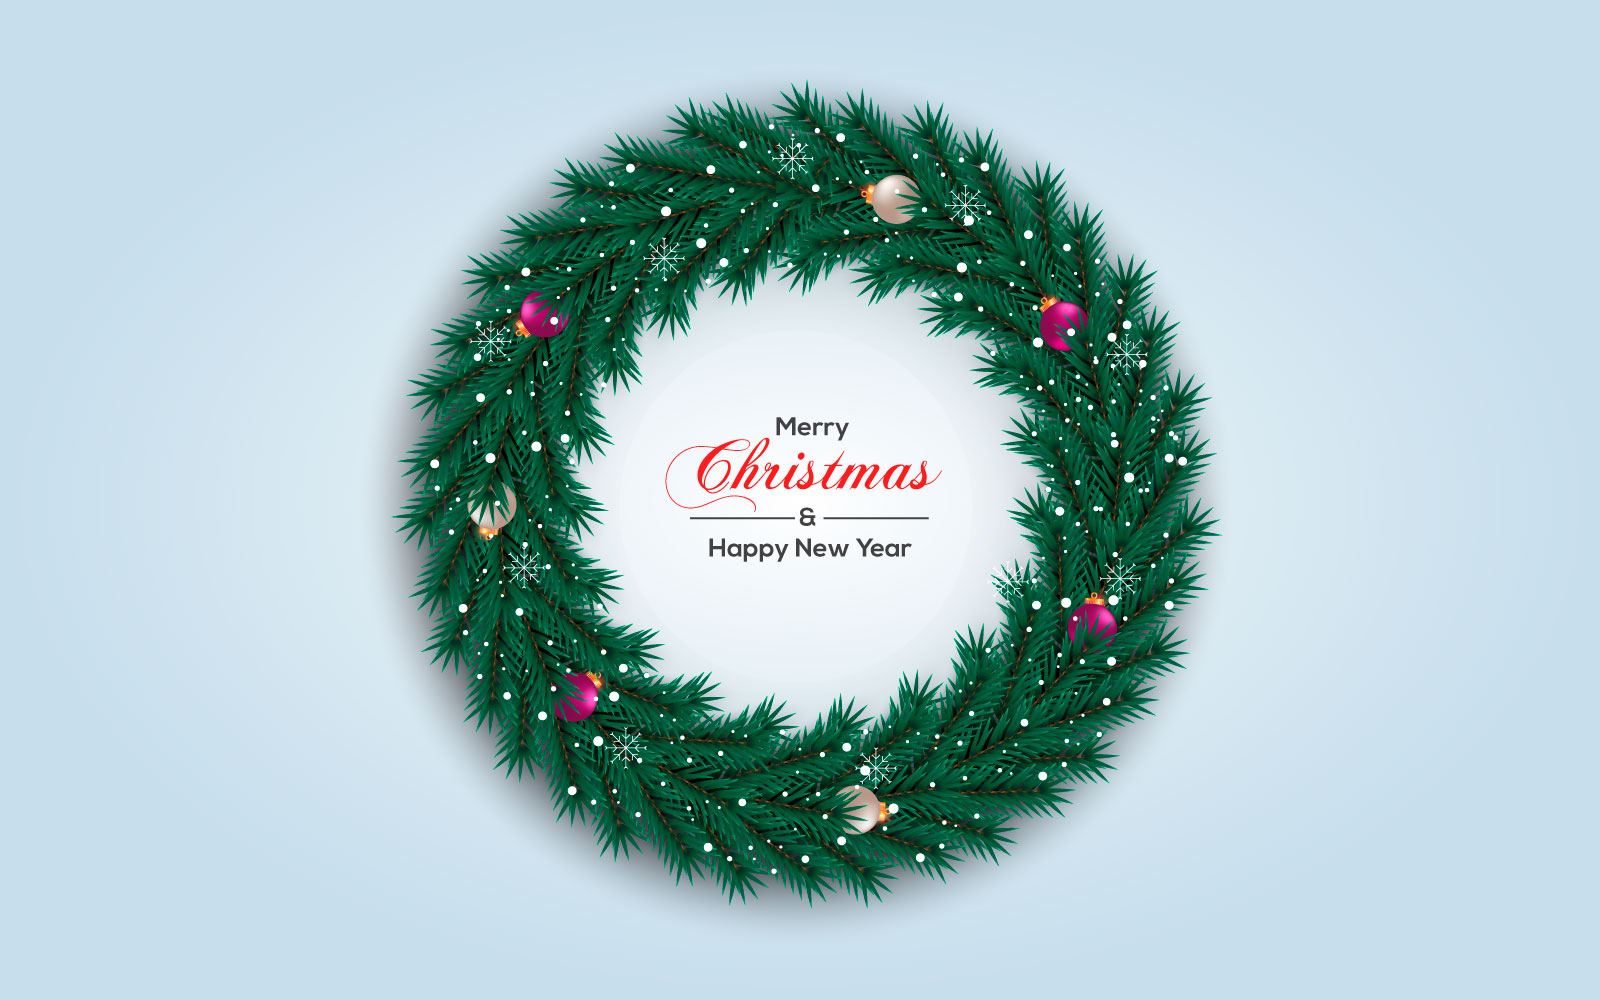 Christmas wreath vector concept design. merry christmas text in grass wreath element with star